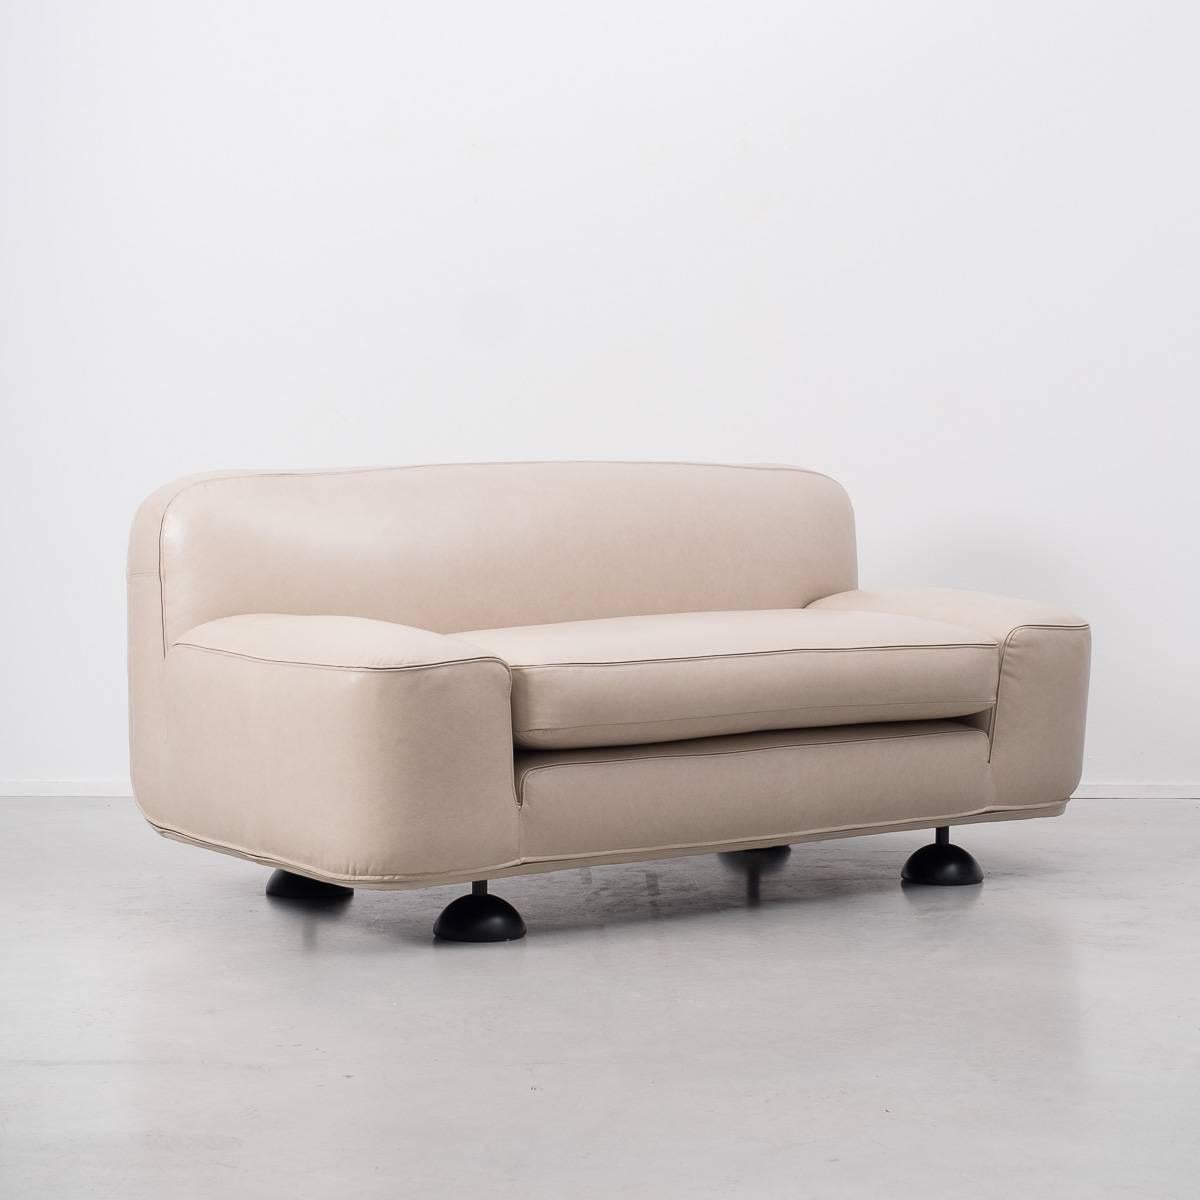 This hard to find Altopiano sofa was manufactured by Bernini and designed by Italian designer Franco Poli. It has some very characterful curves, unique proportions and playful leg detailing making it an incredibly distinctive piece. Franco Poli has